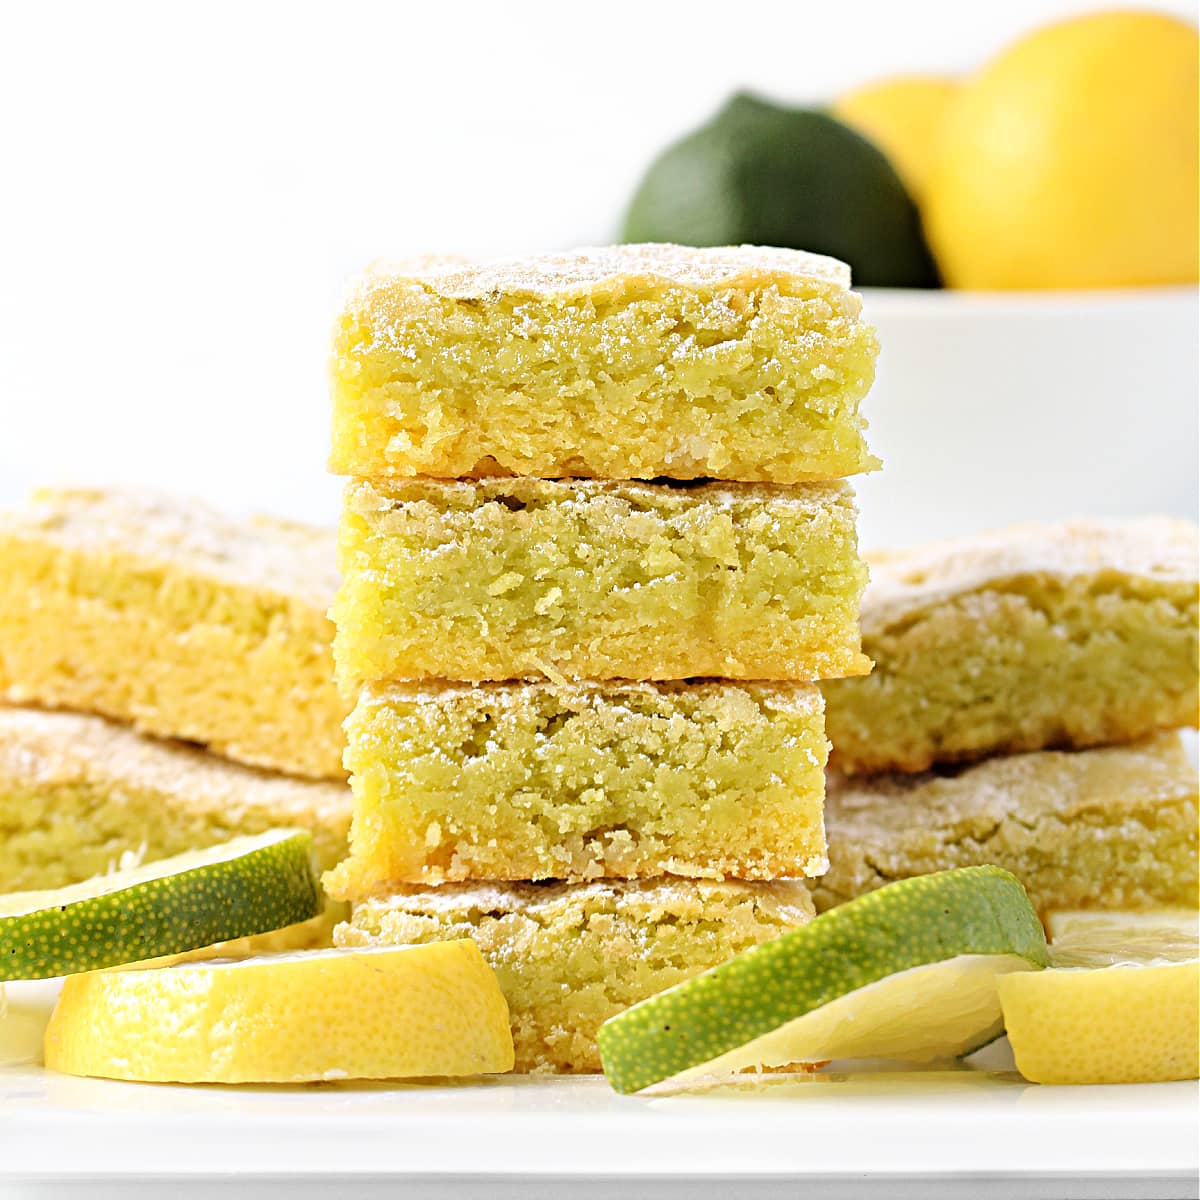 Stack of Lemon Lime Bars showing the lemon layer topped with the lime layer.